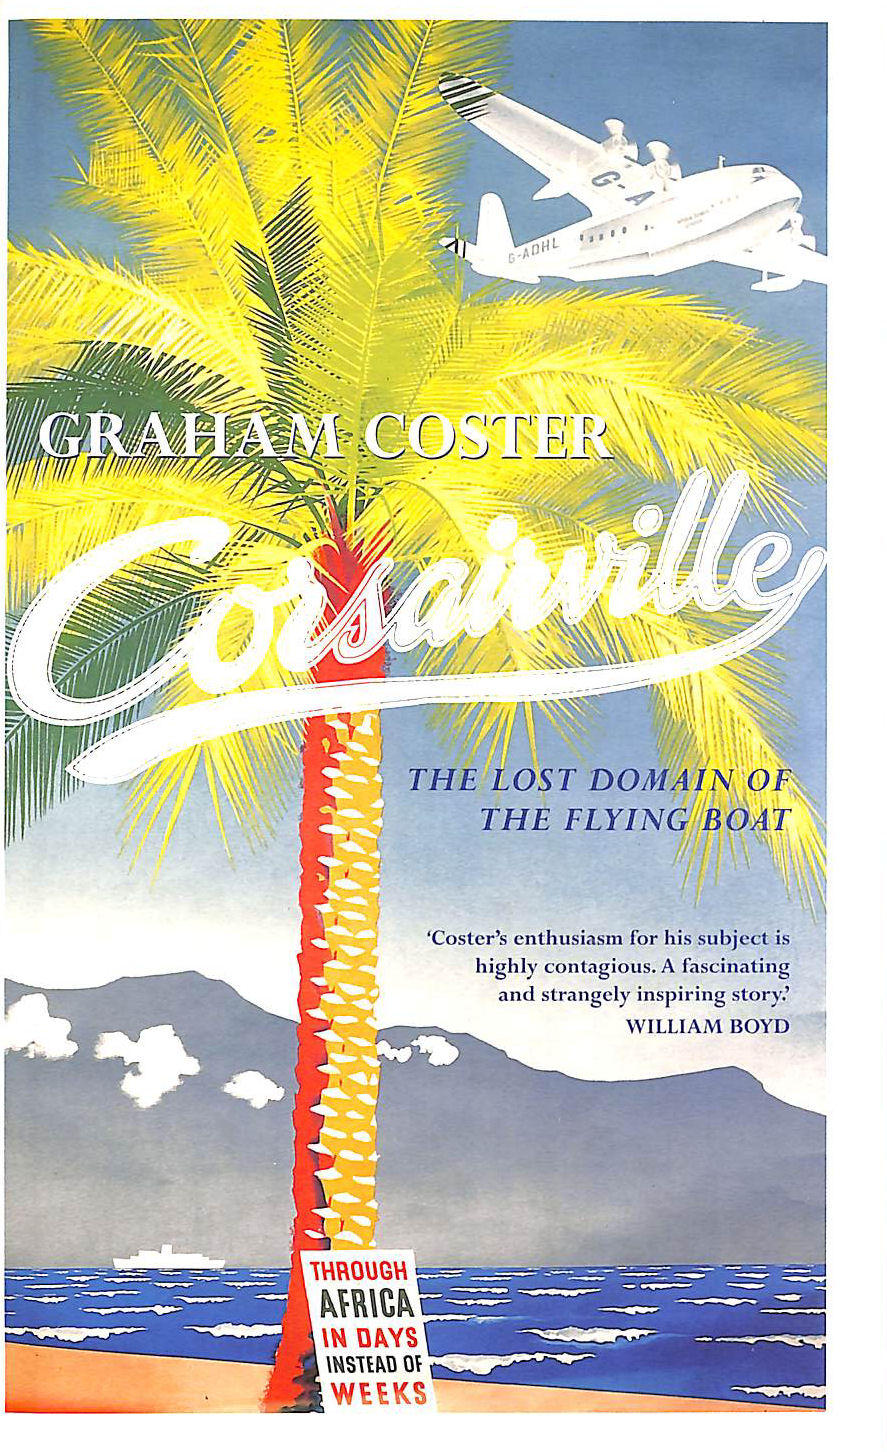 COSTER, GRAHAM - Corsairville: The Lost Domain of the Flying Boat